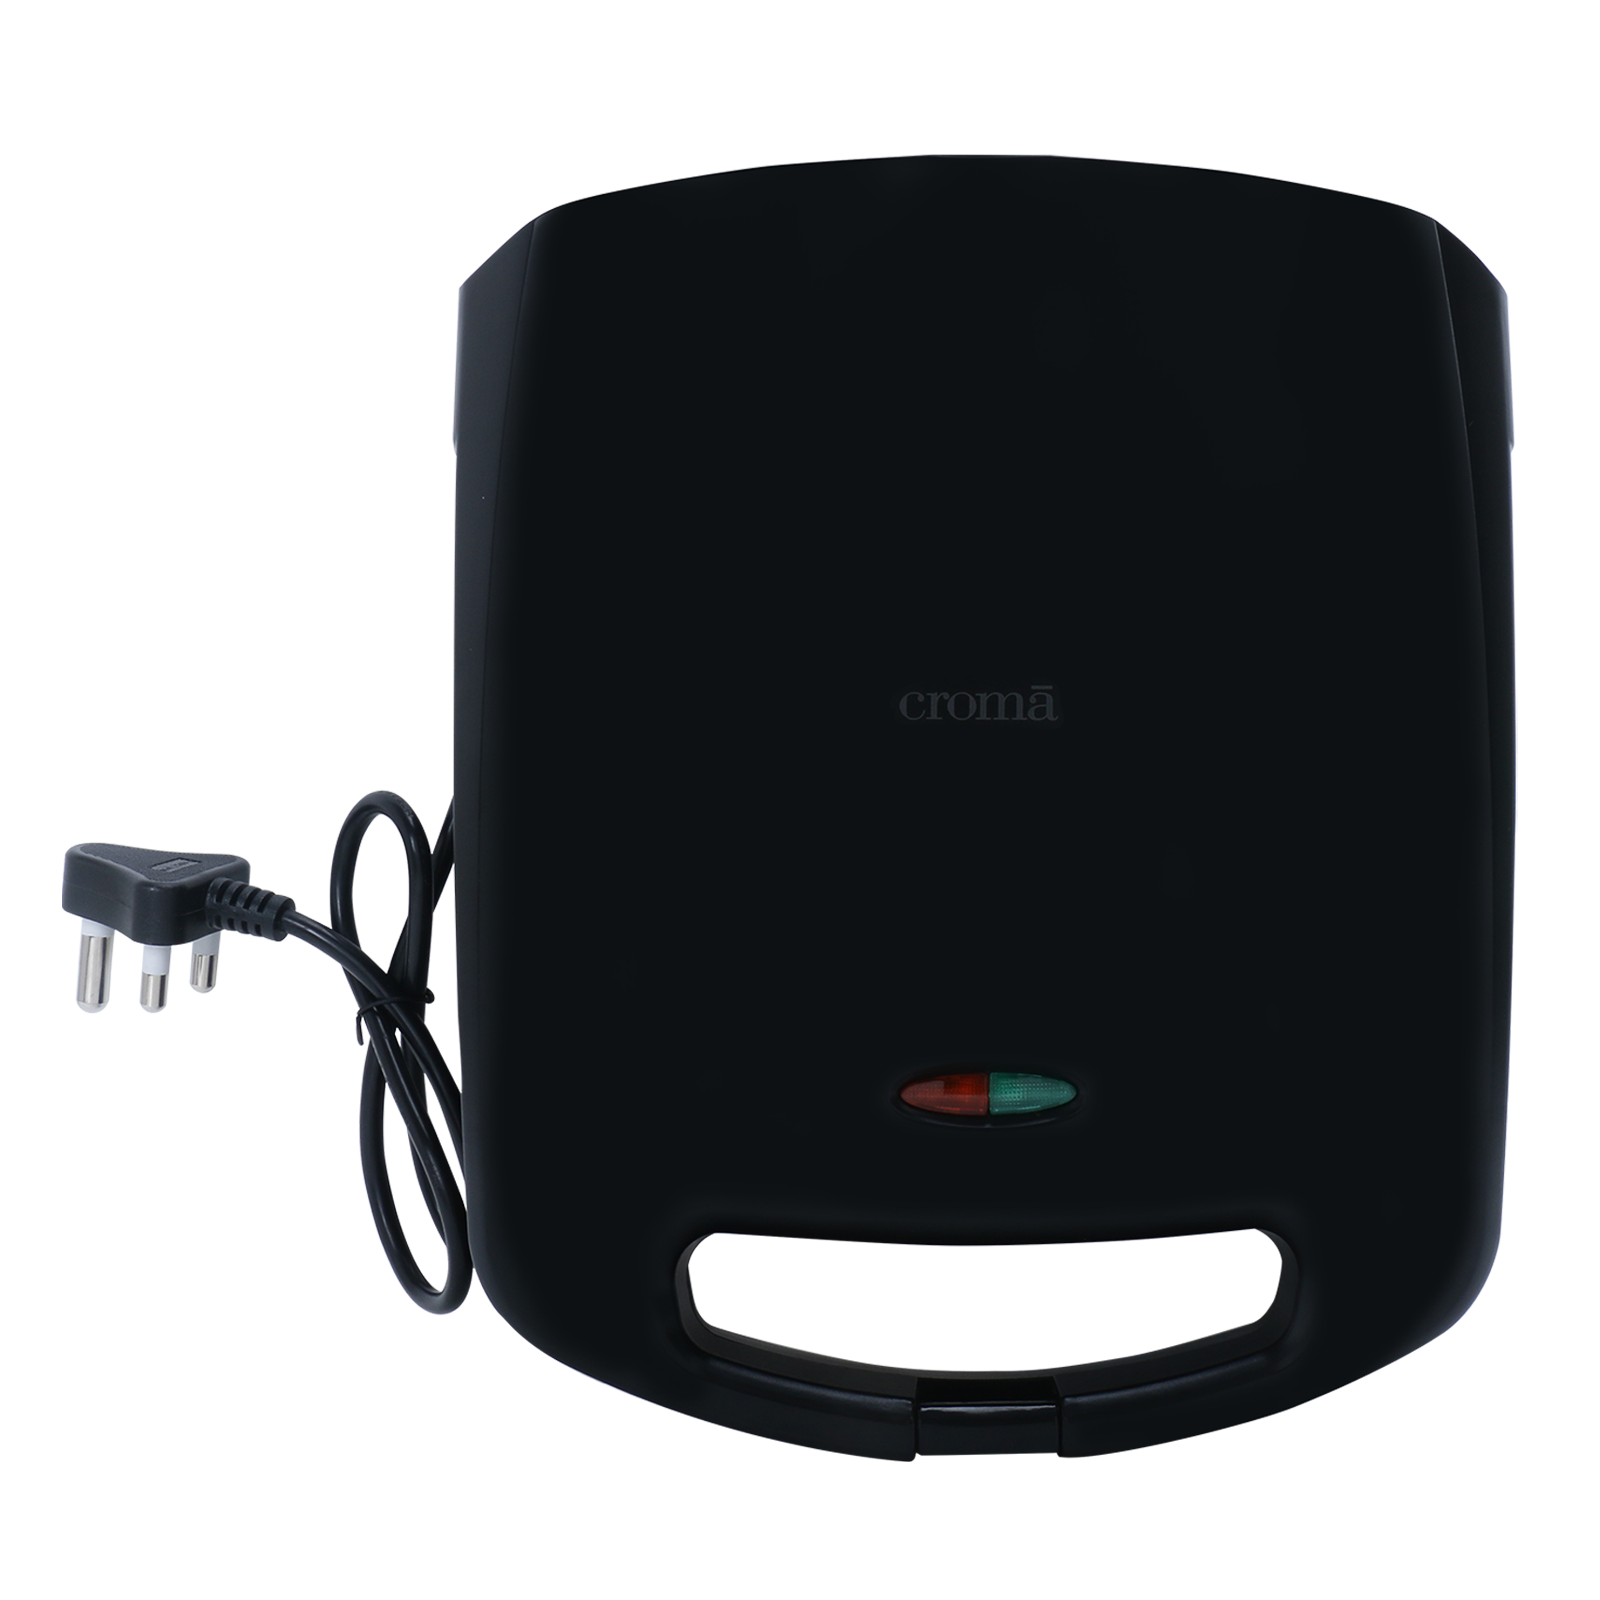 https://media.croma.com/image/upload/v1691679174/Croma%20Assets/Small%20Appliances/Toasters%20Sandwich%20Makers/Images/258451_0_ewgyls.png